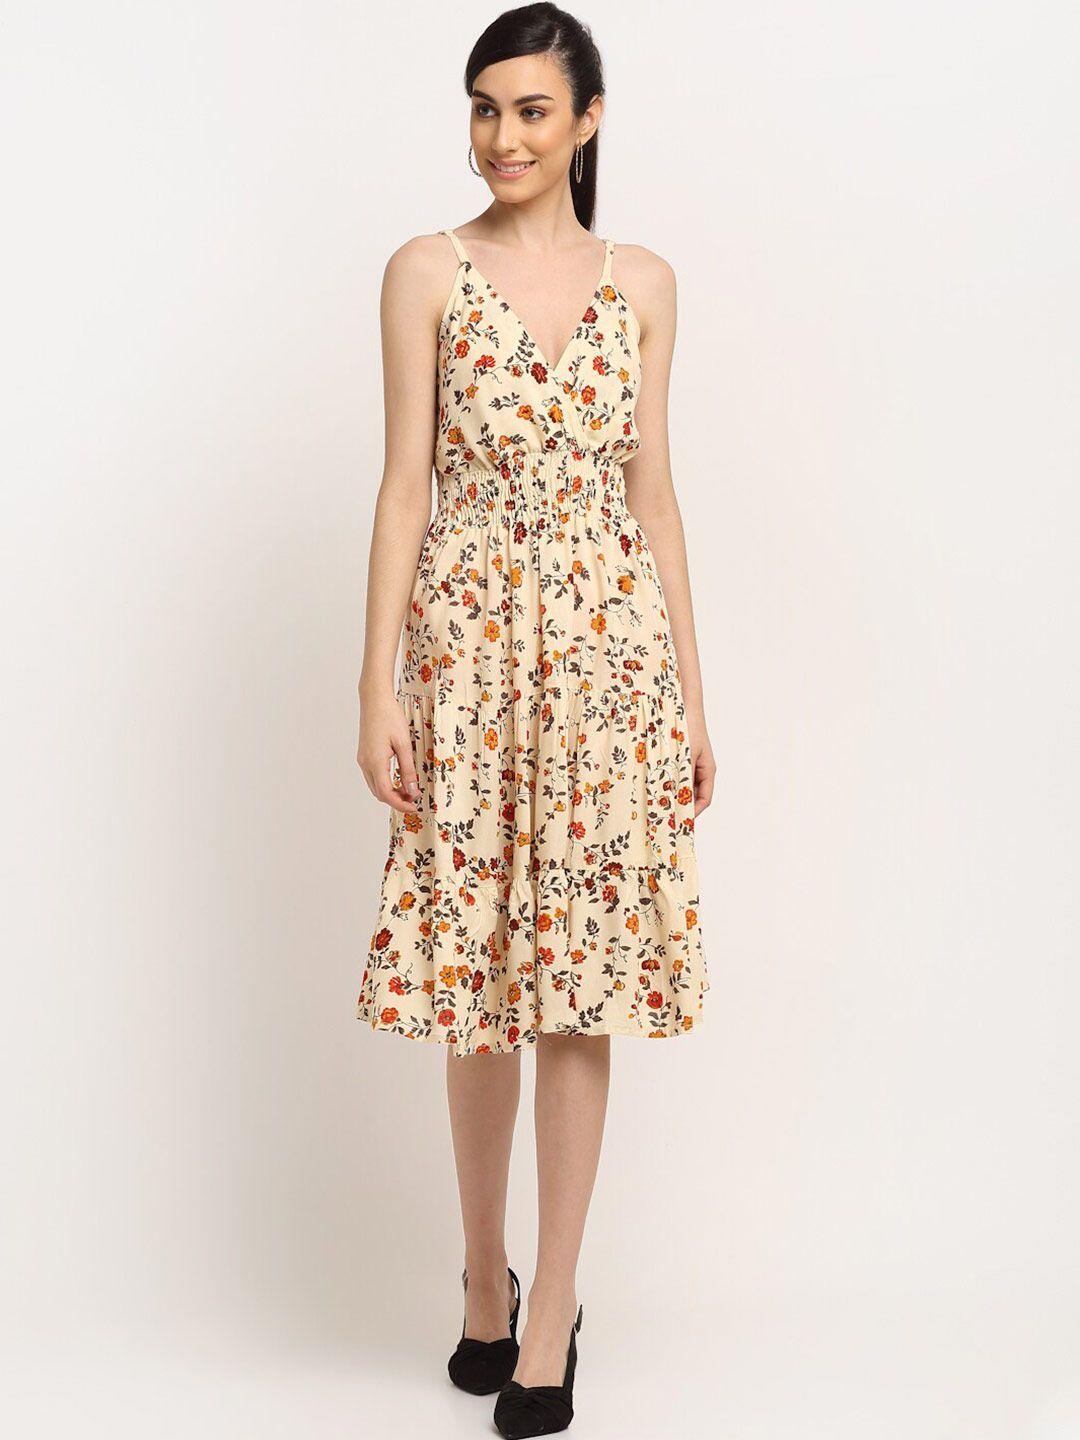 aawari cream-coloured & red floral a-line dress